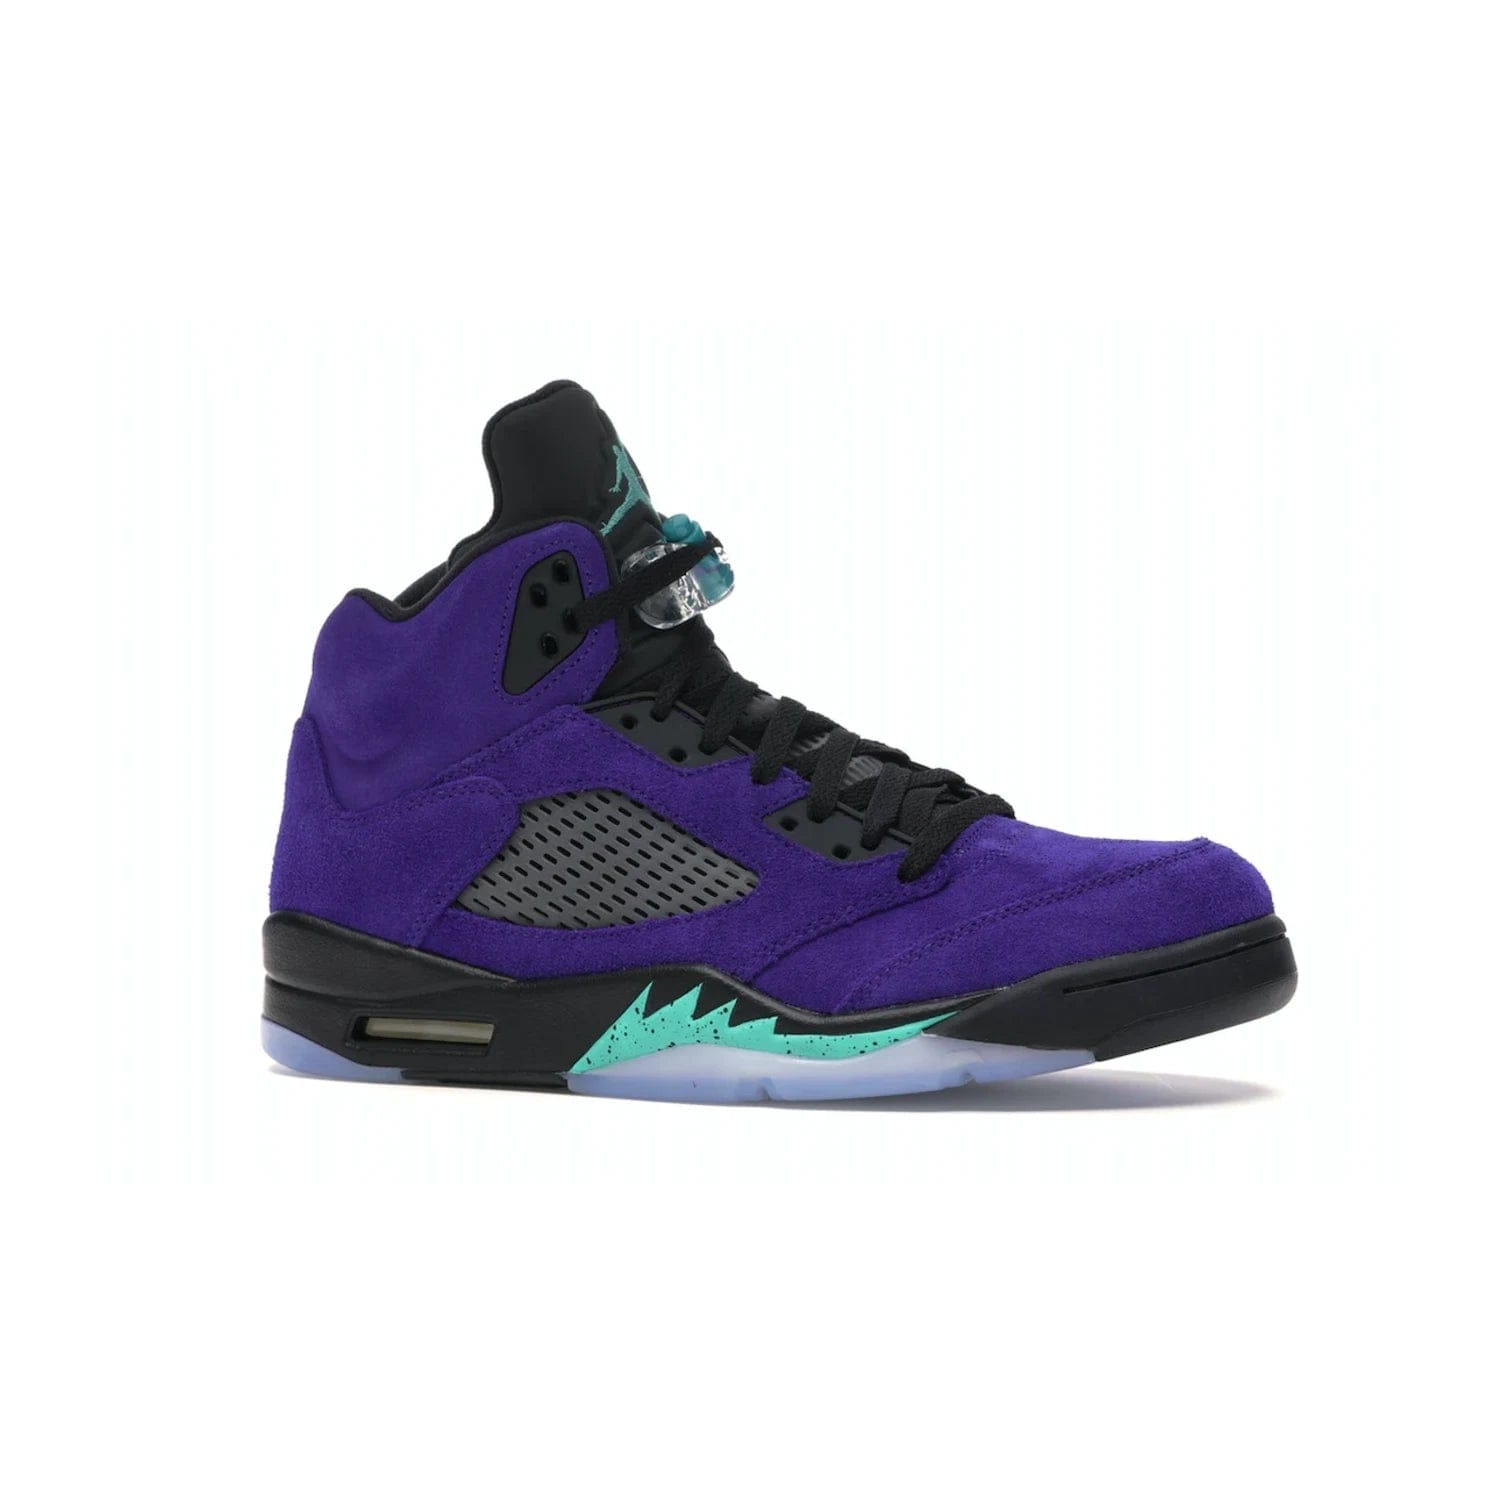 Jordan 5 Retro Alternate Grape - Image 3 - Only at www.BallersClubKickz.com - Bring the classic Jordan 5 Retro Alternate Grape to your sneaker collection! Featuring a purple suede upper, charcoal underlays, green detailing, and an icy and green outsole. Releasing for the first time since 1990, don't miss this chance to add a piece of sneaker history to your collection.